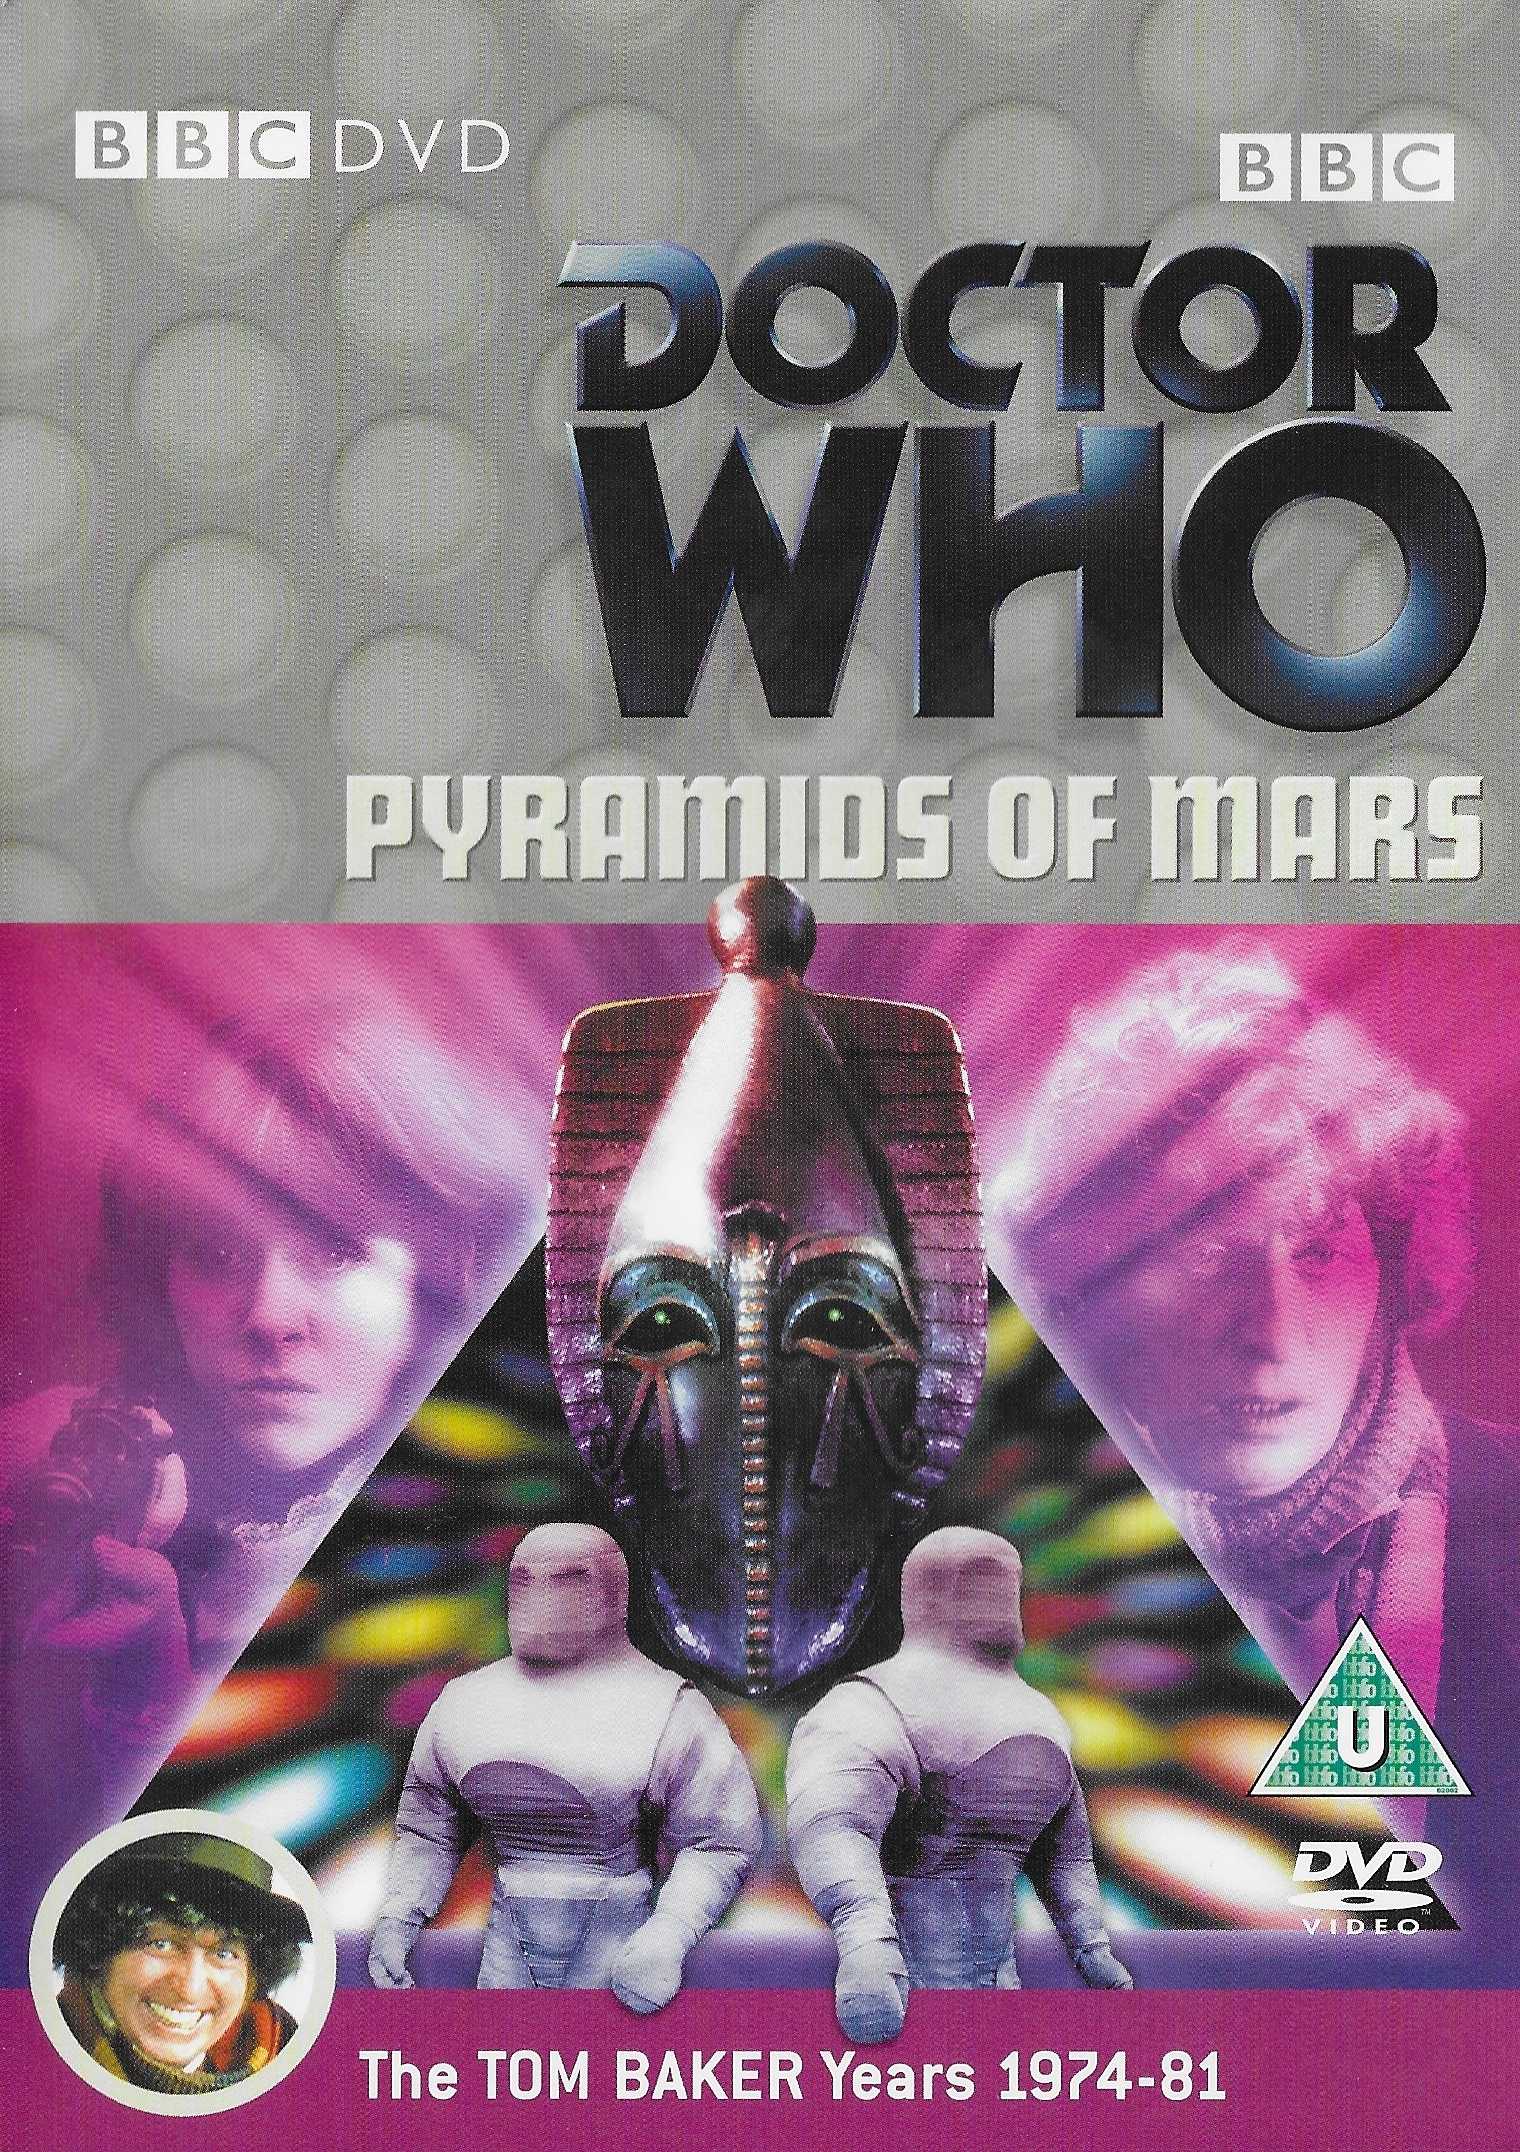 Picture of BBCDVD 1350 Doctor Who - Pyramids of Mars by artist Bob Baker / Dave Martin from the BBC dvds - Records and Tapes library